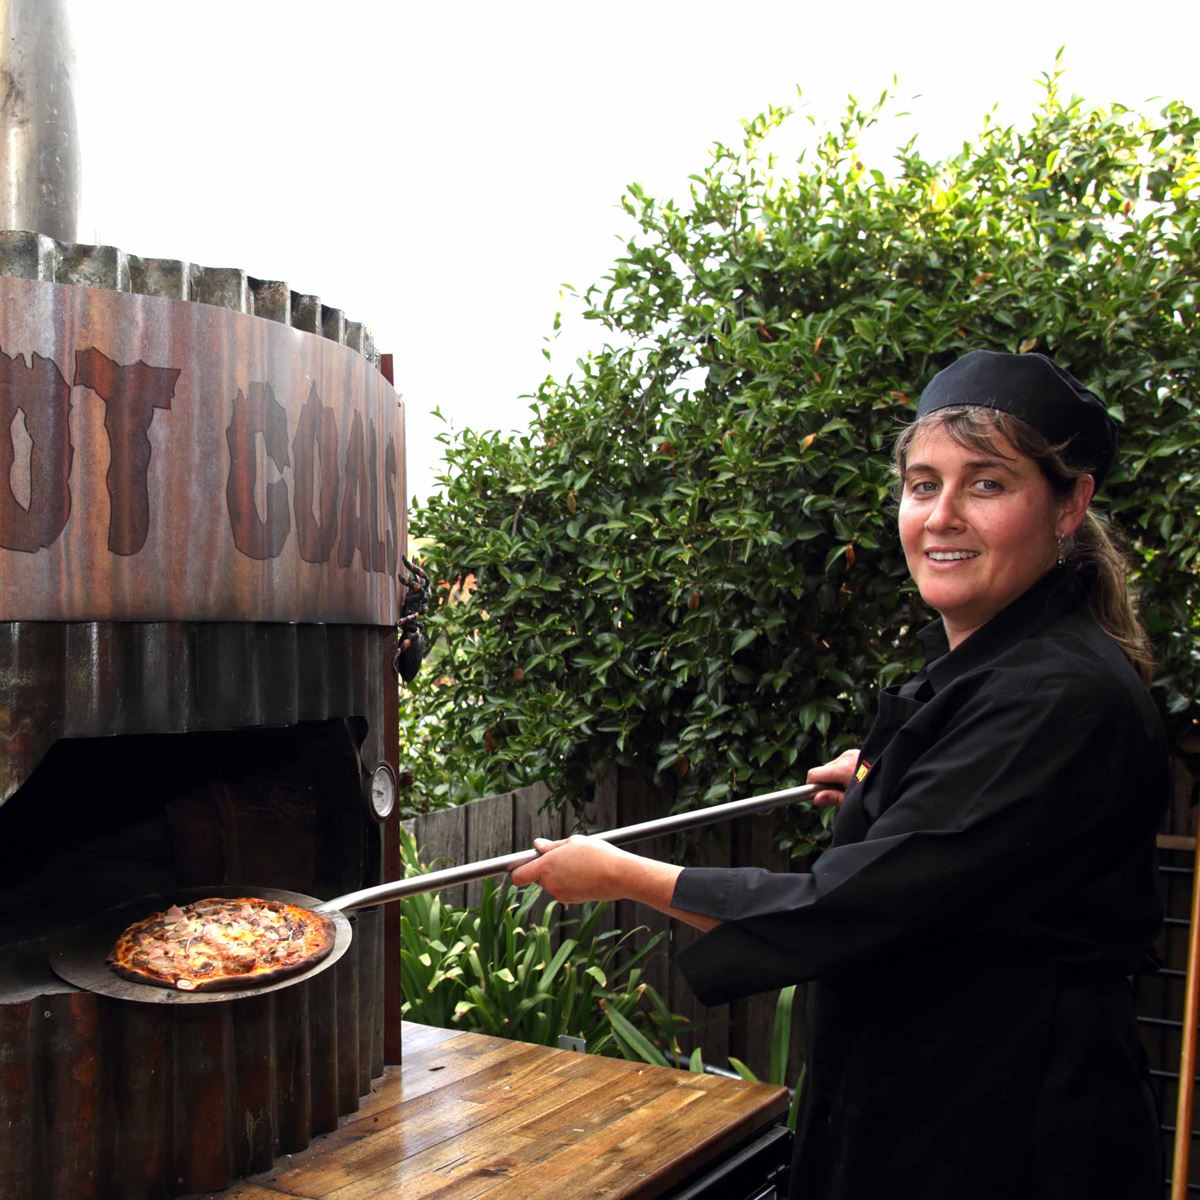 Woodfired pizzas and other creations will delight guests. Image: Hot Coals